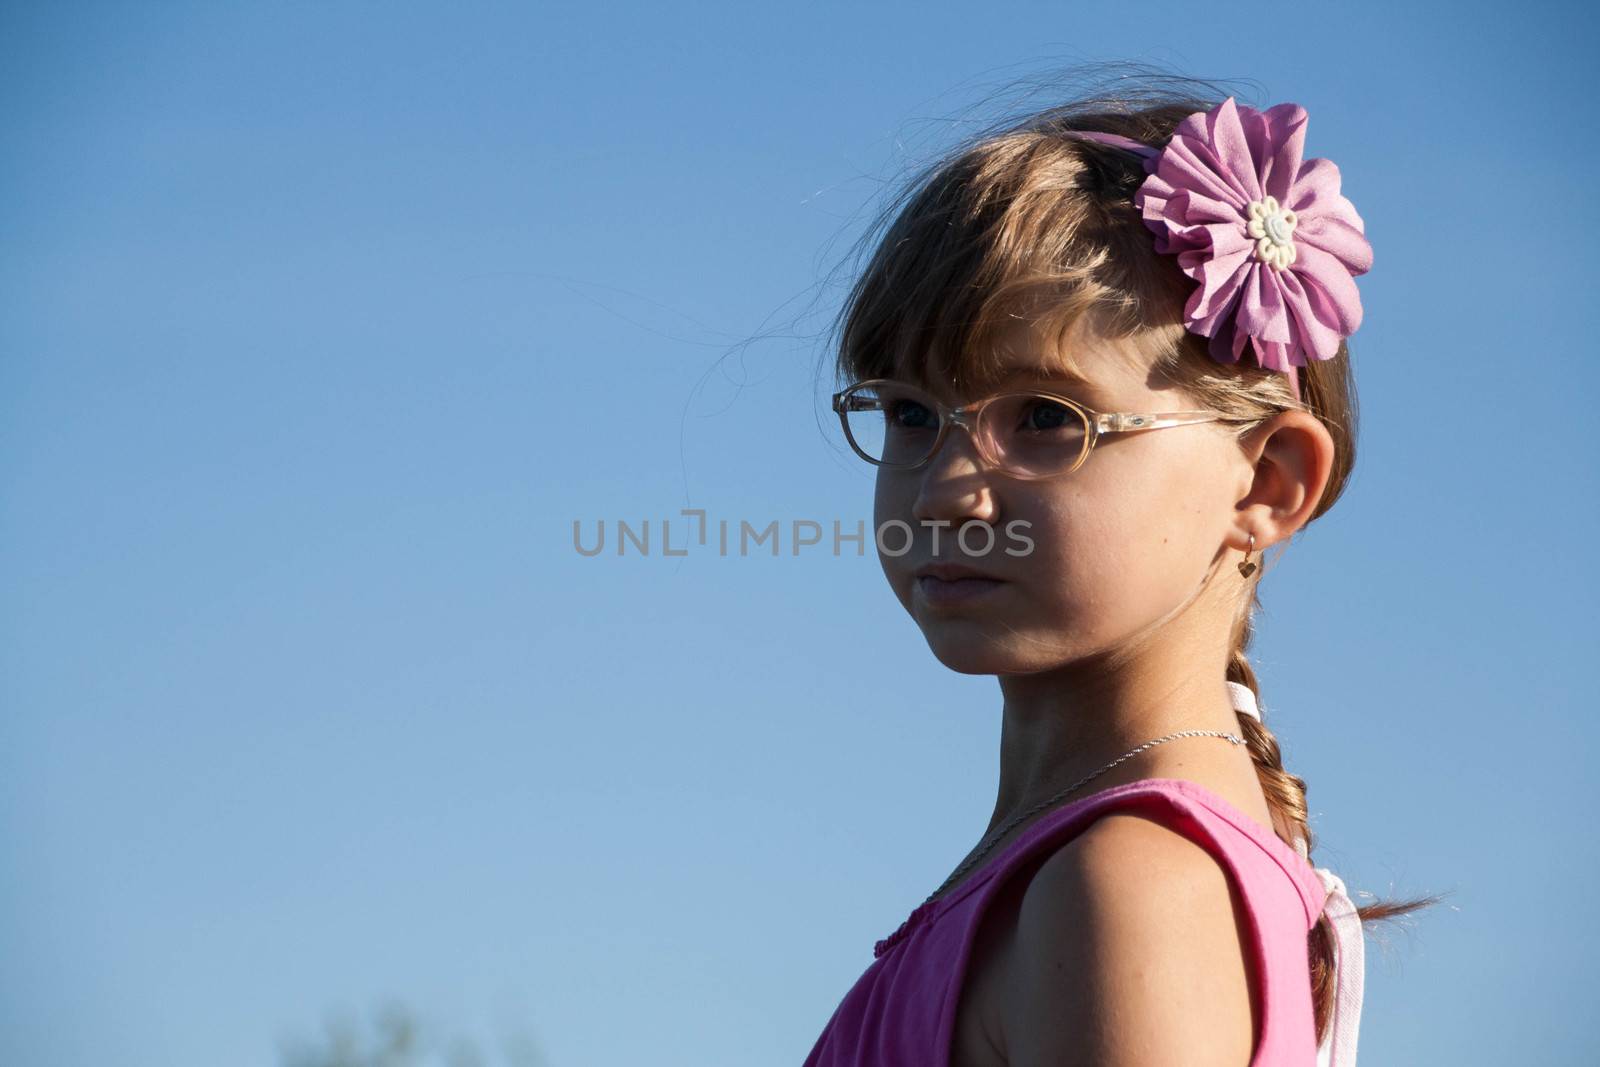  little blond girl with glasses bent her head